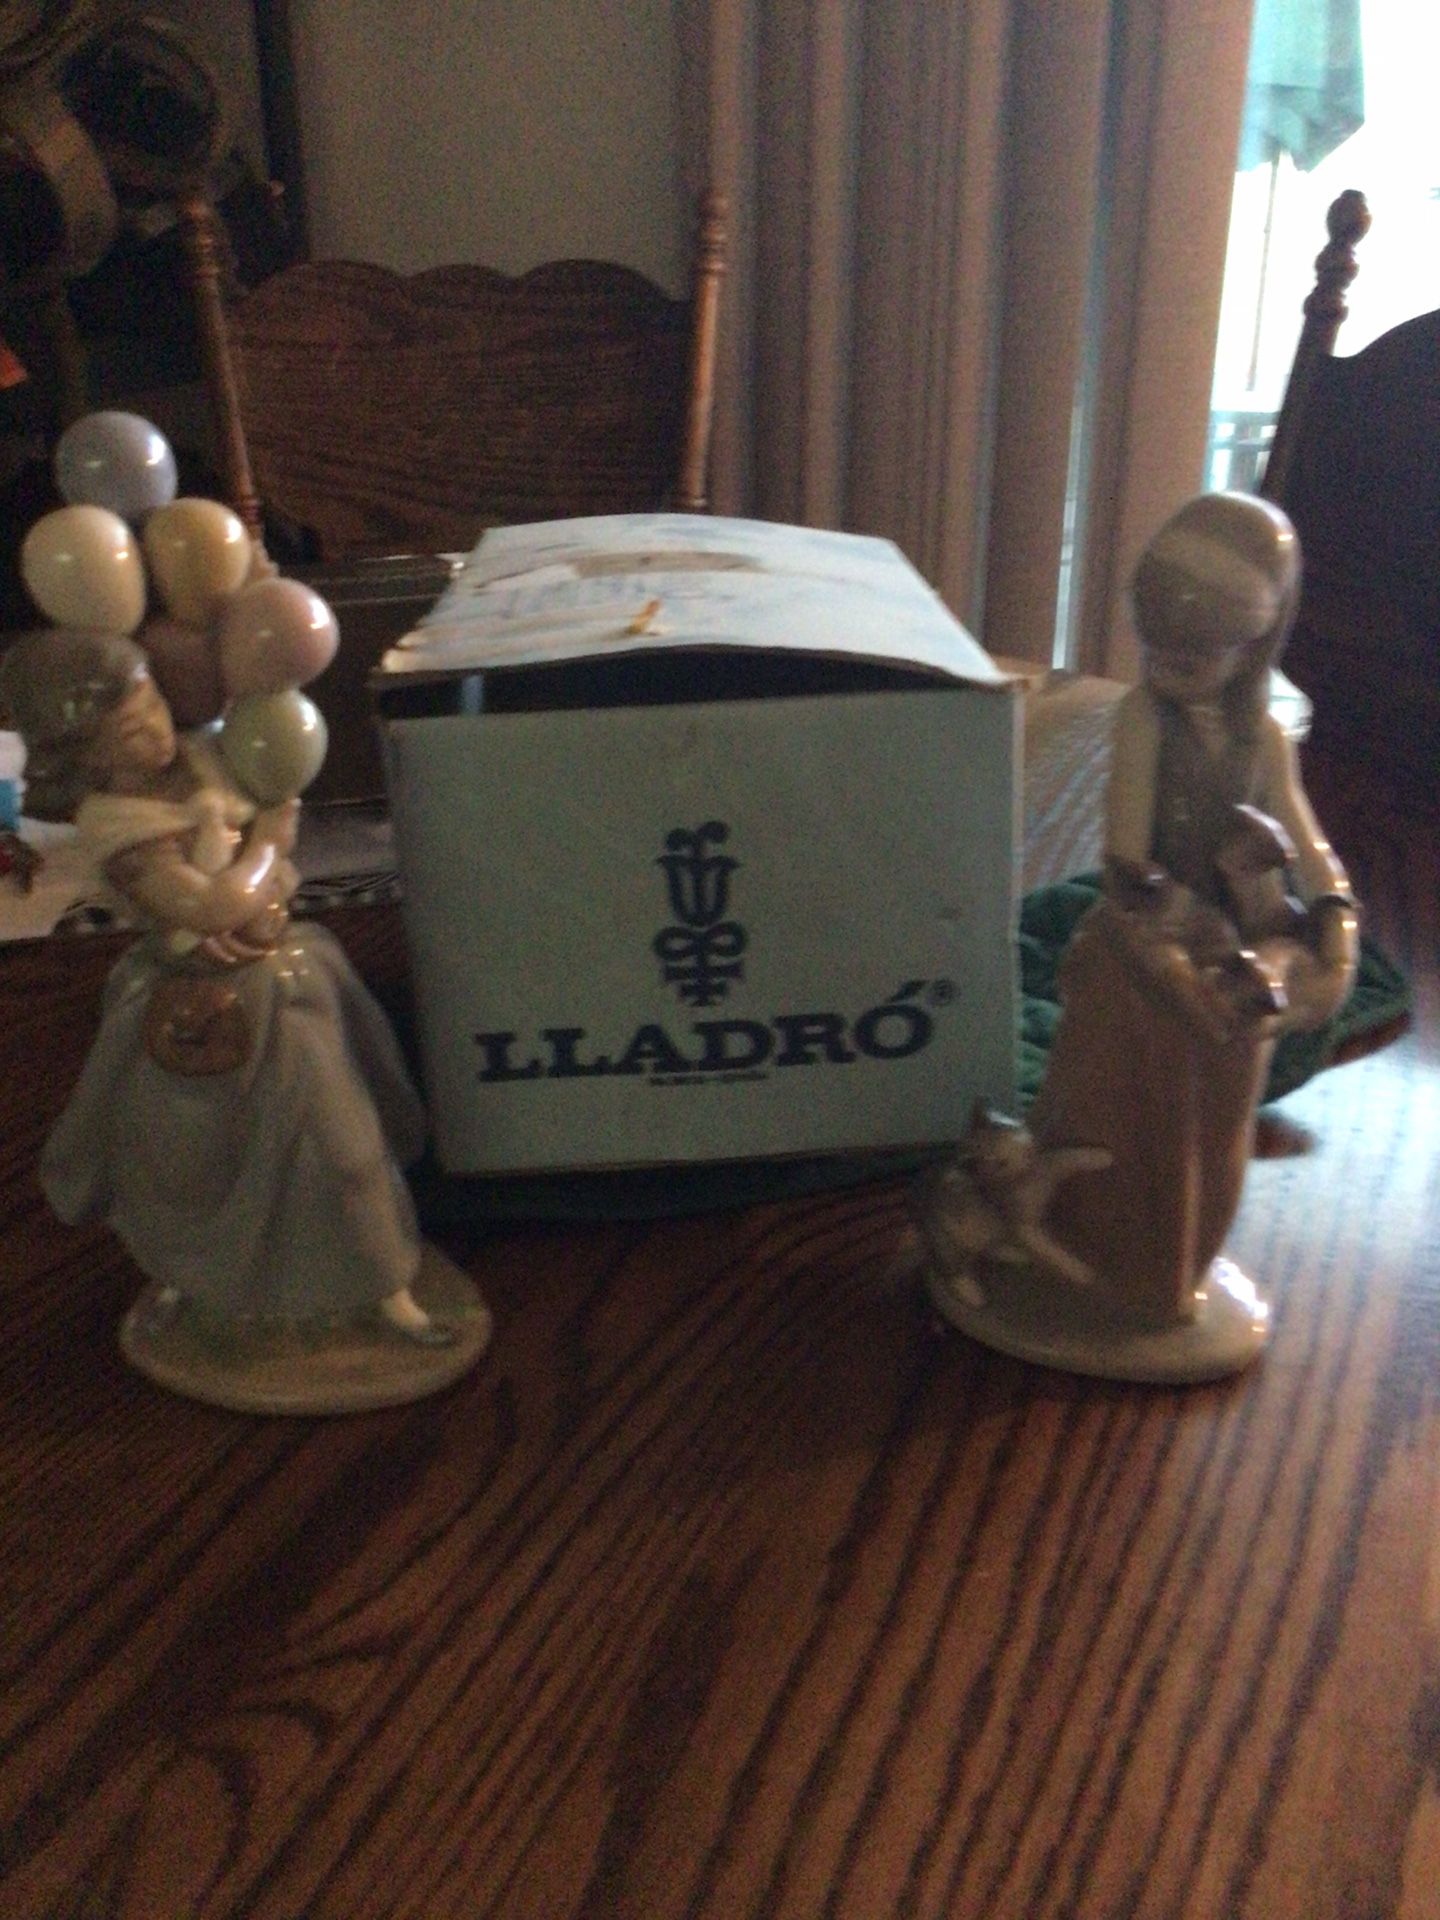 Lladro Porcelain figurines From Spain Circa Early 1980s .$100